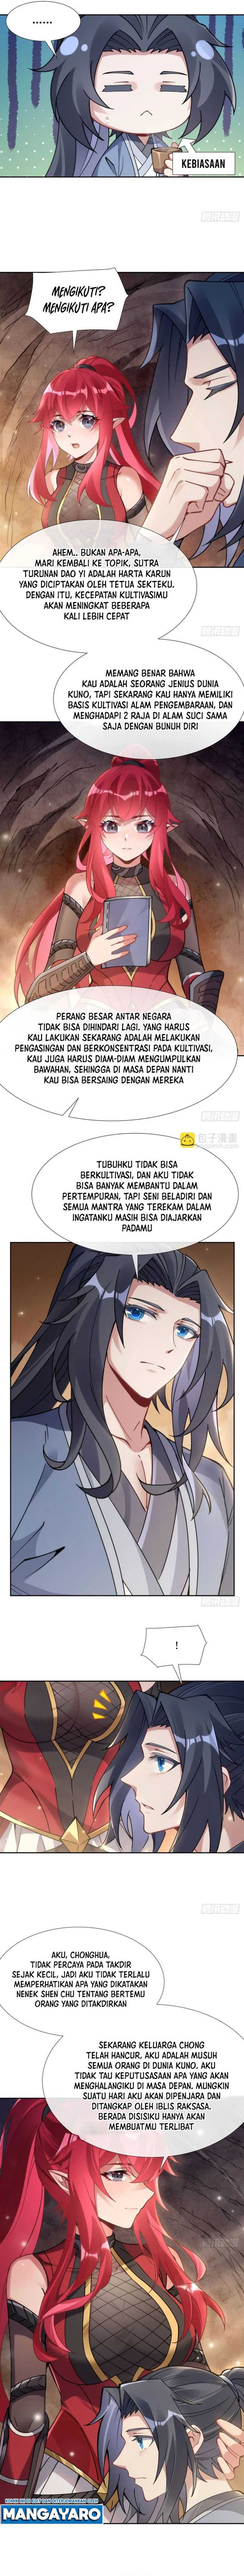 Dilarang COPAS - situs resmi www.mangacanblog.com - Komik my female apprentices are all big shots from the future 152 - chapter 152 153 Indonesia my female apprentices are all big shots from the future 152 - chapter 152 Terbaru 5|Baca Manga Komik Indonesia|Mangacan